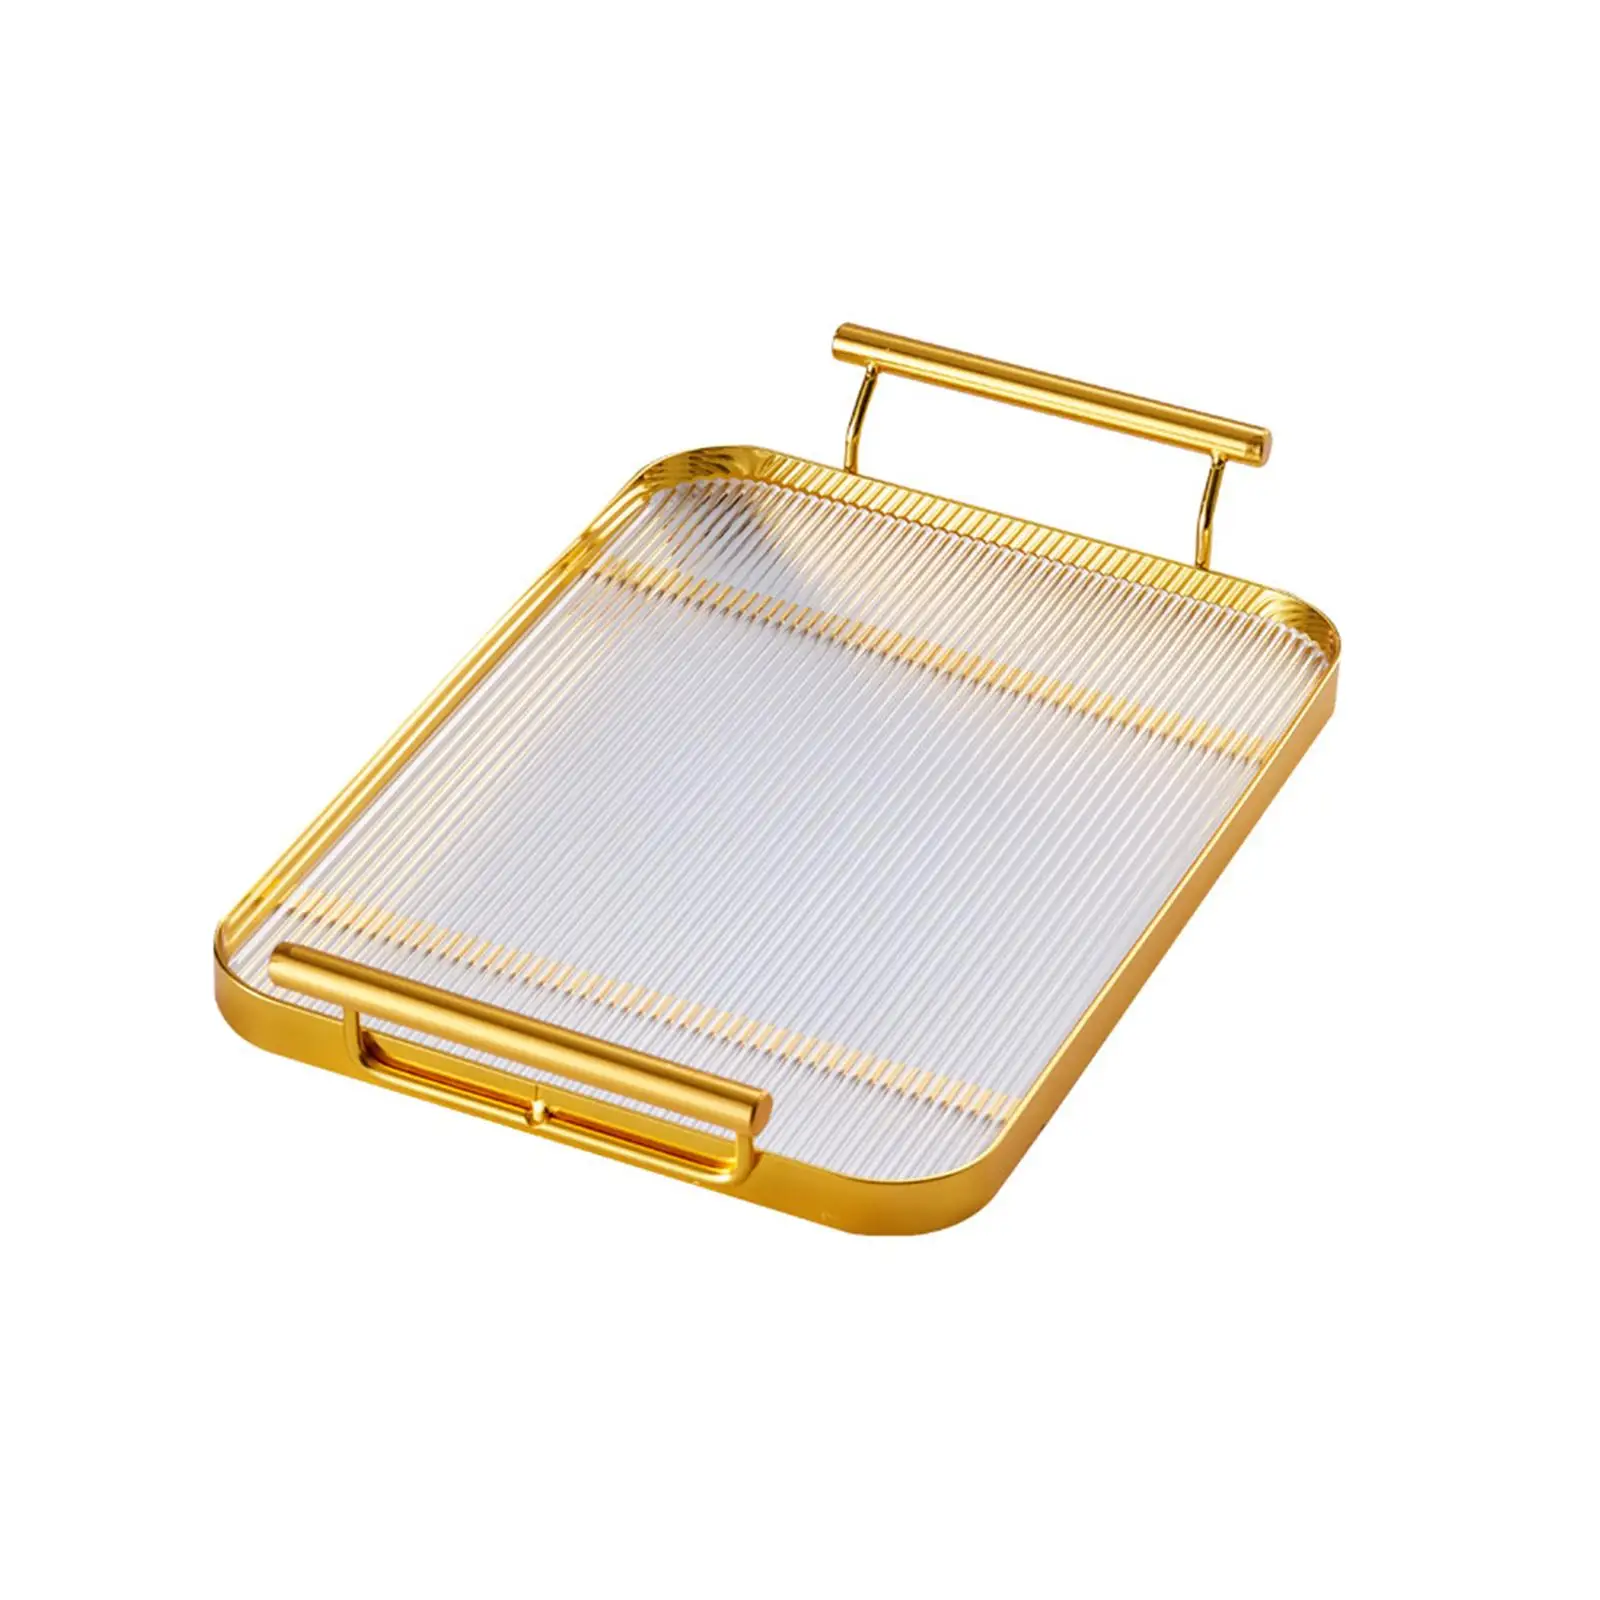 Serving Tray with Handle Appetizer Display Keys Drinks coffee servings Tray for Countertop Bedside Table Kitchen Cabinet Bedroom